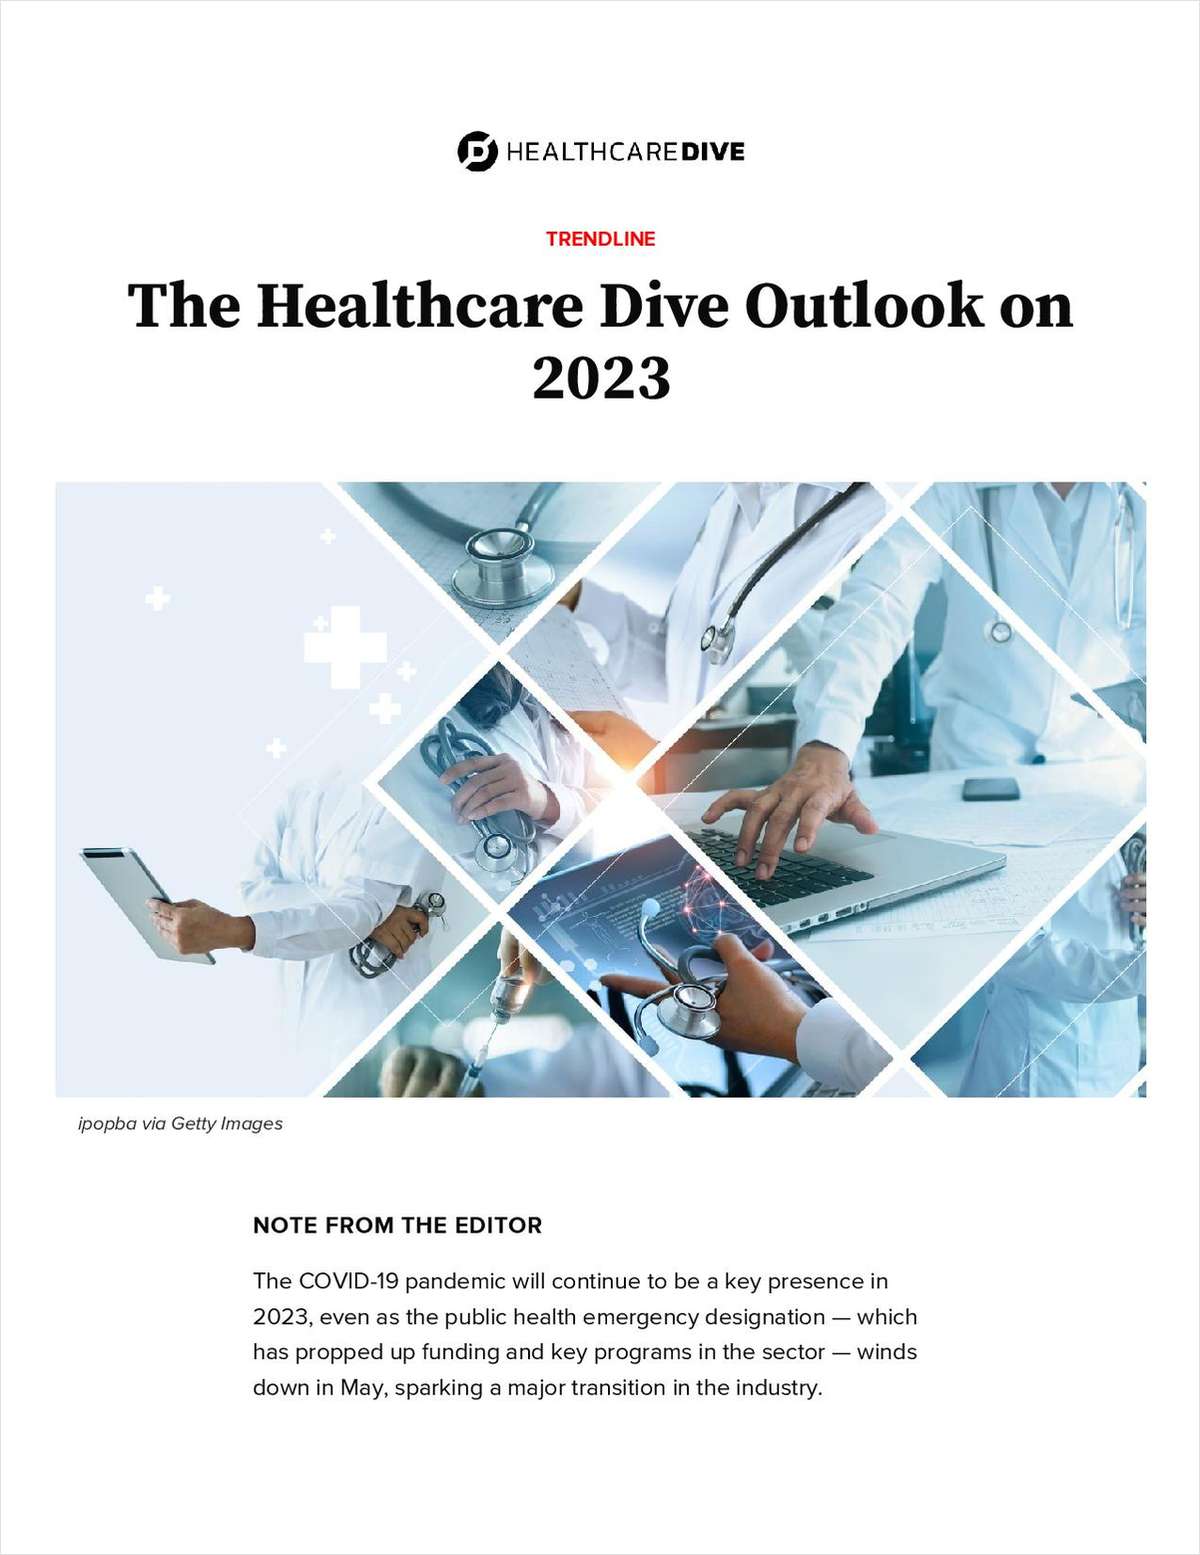 The Healthcare Dive Outlook on 2023